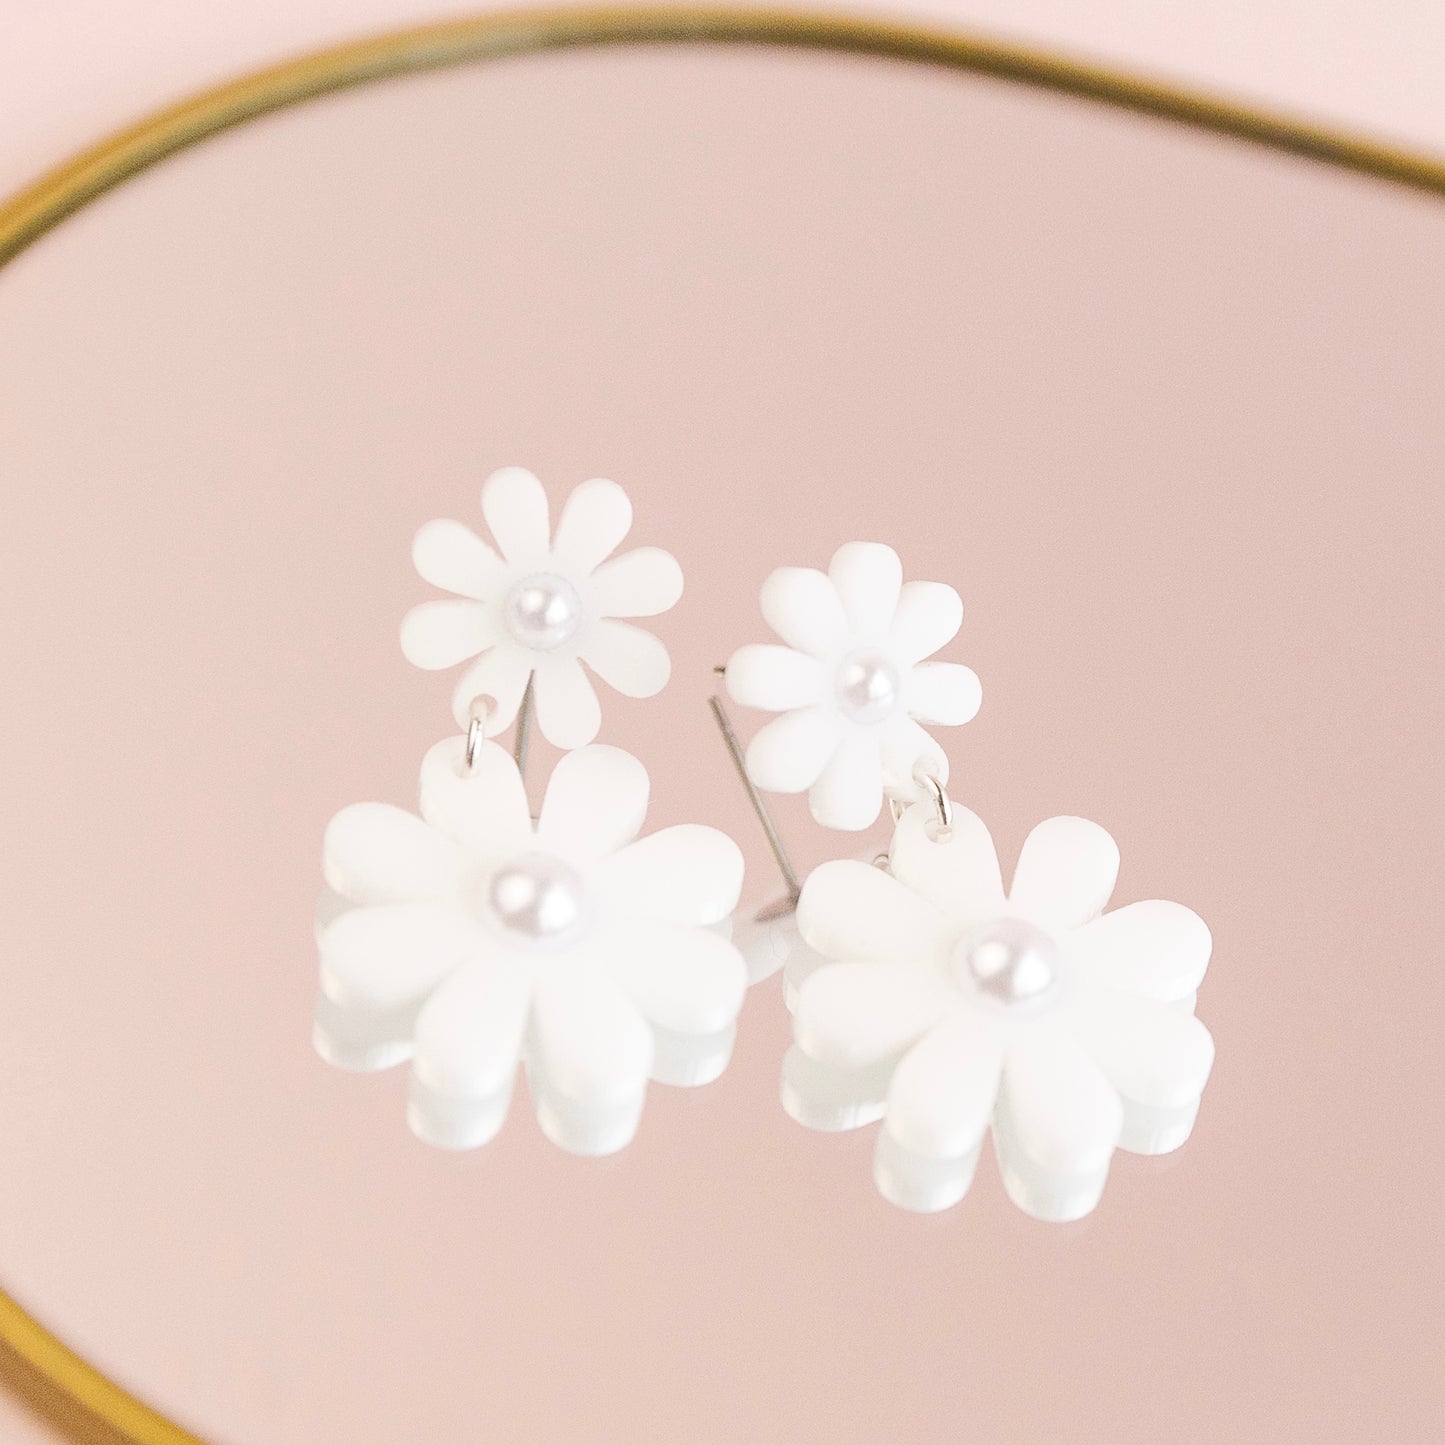 The Daisy Pearl Drop in White/ Lightweight Acrylic Statement Earrings